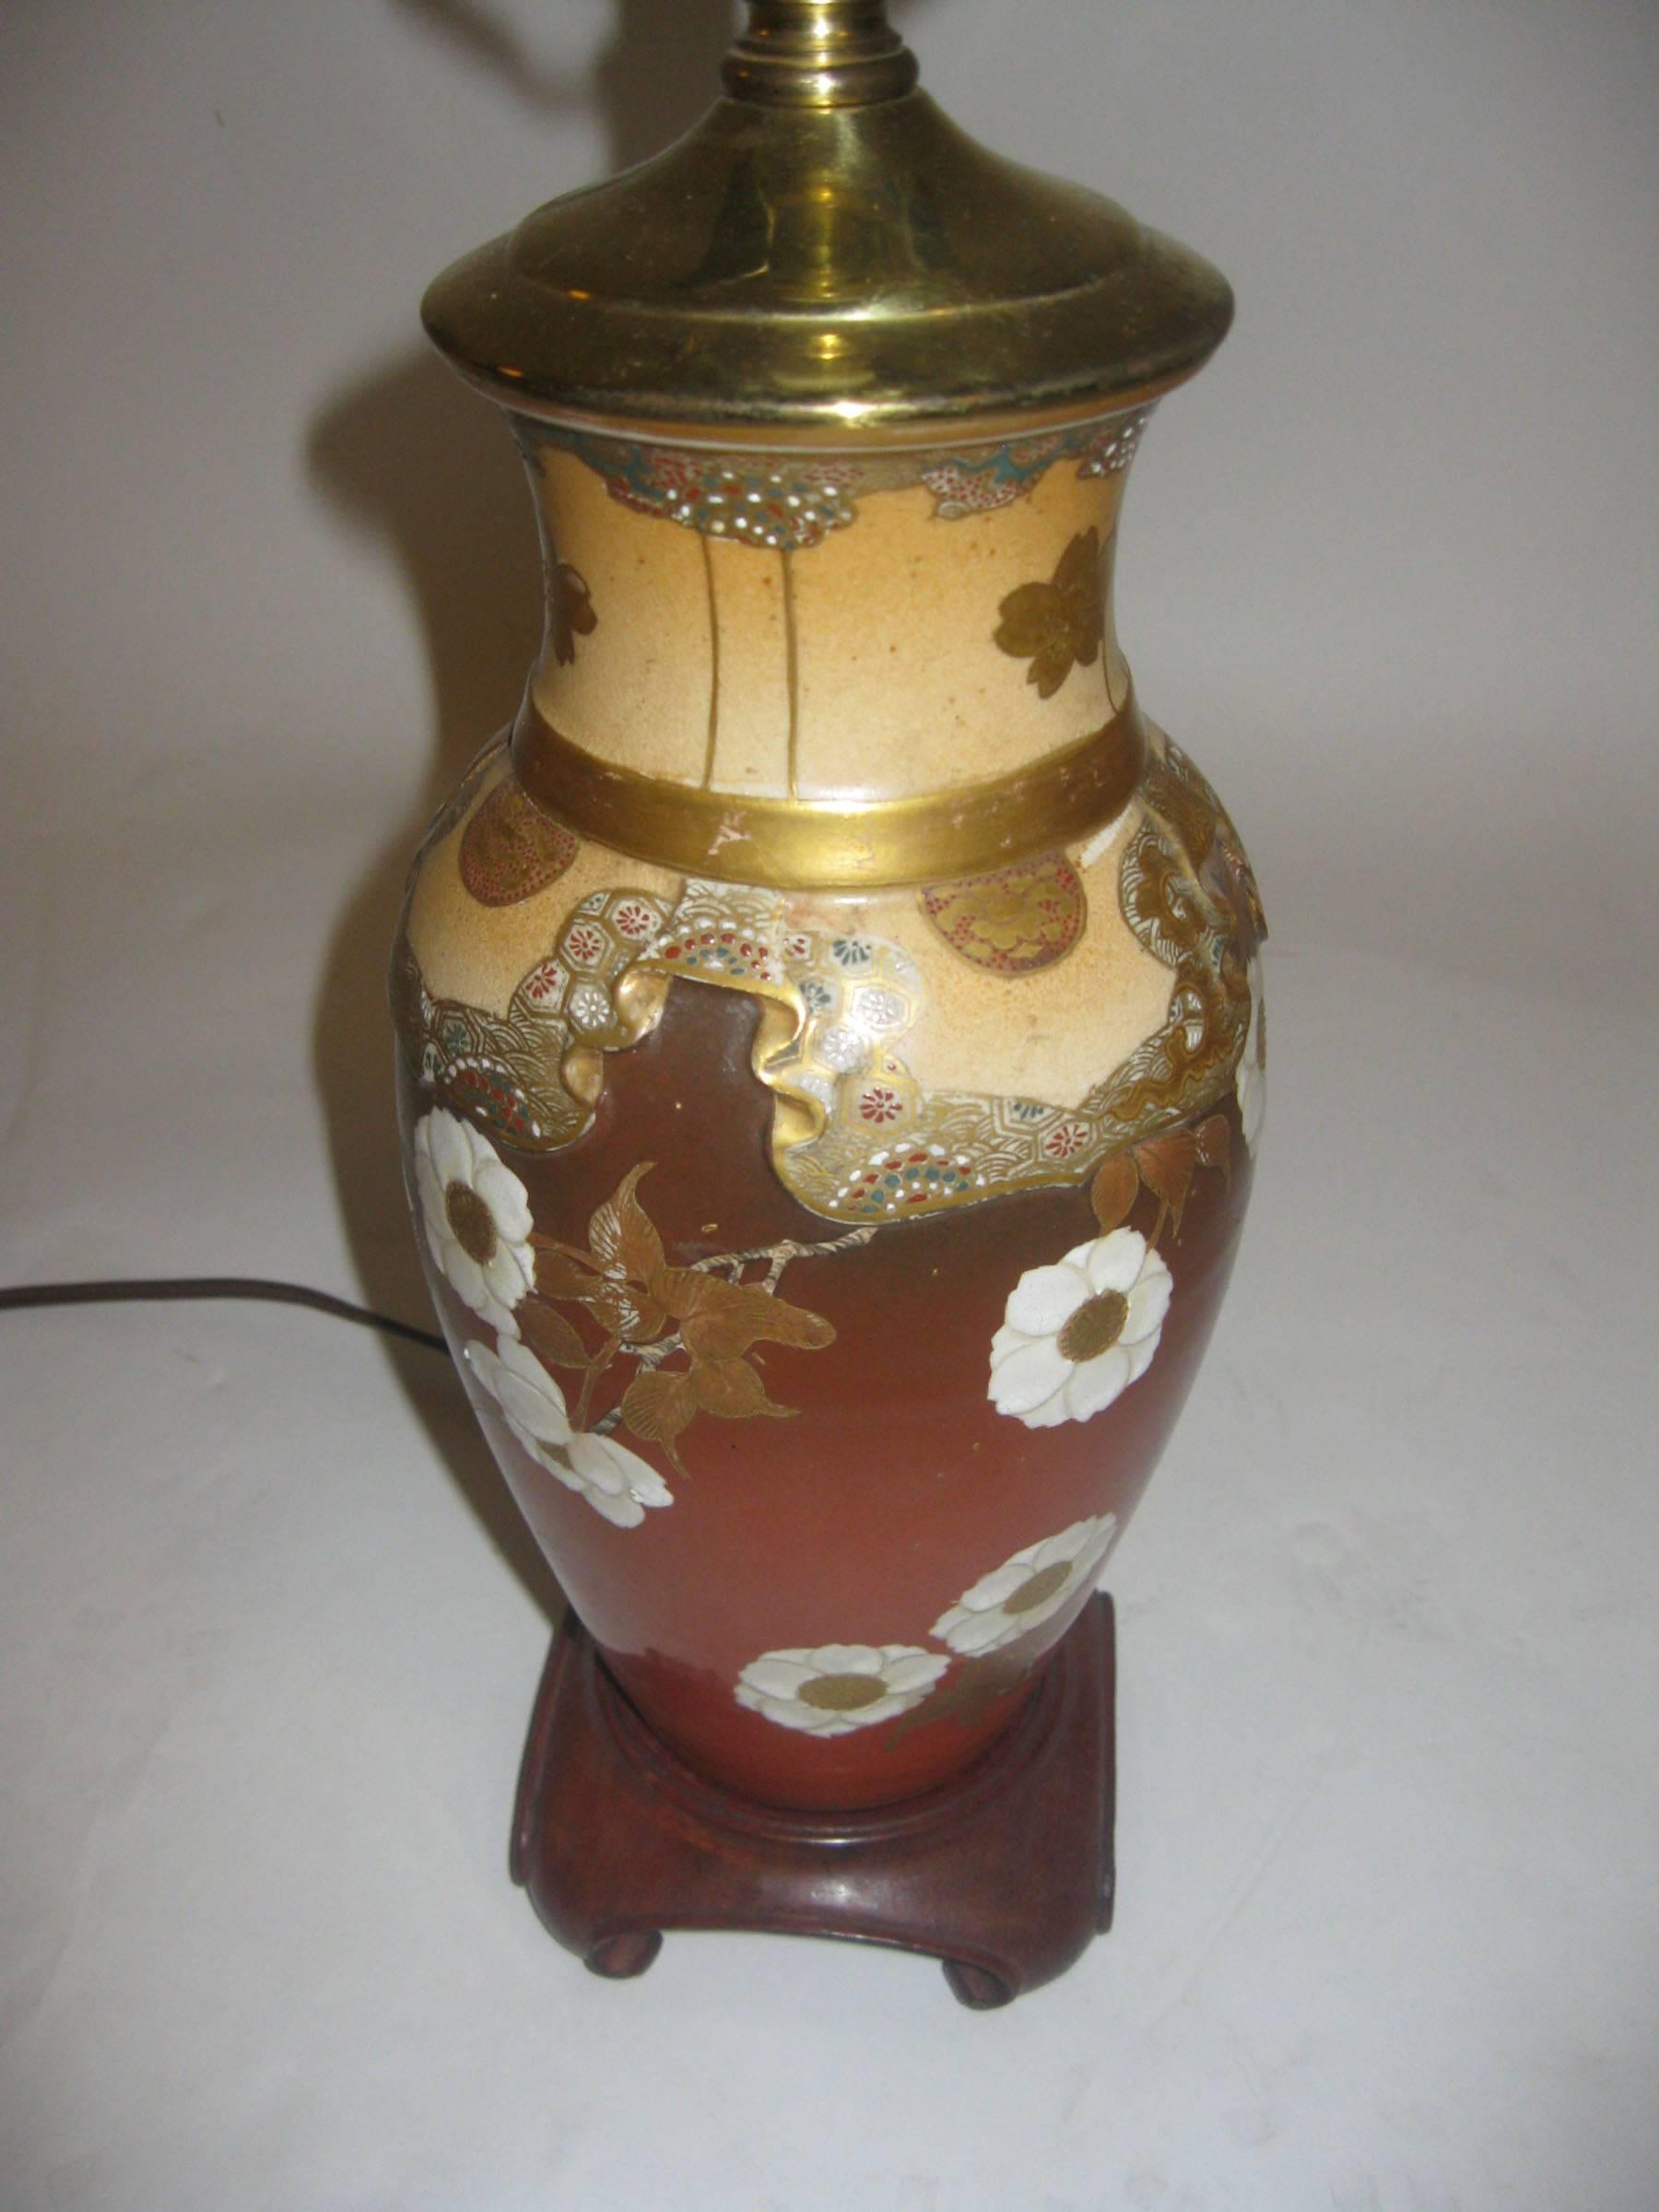 Made for the European market in the Meiji period, this lovely Japanese Satsuma porcelain vase has been converted into a table lamp and mounted on a wooden base. Decorated with delicate blossoms and featuring enamels and gilt over a clear glaze, the